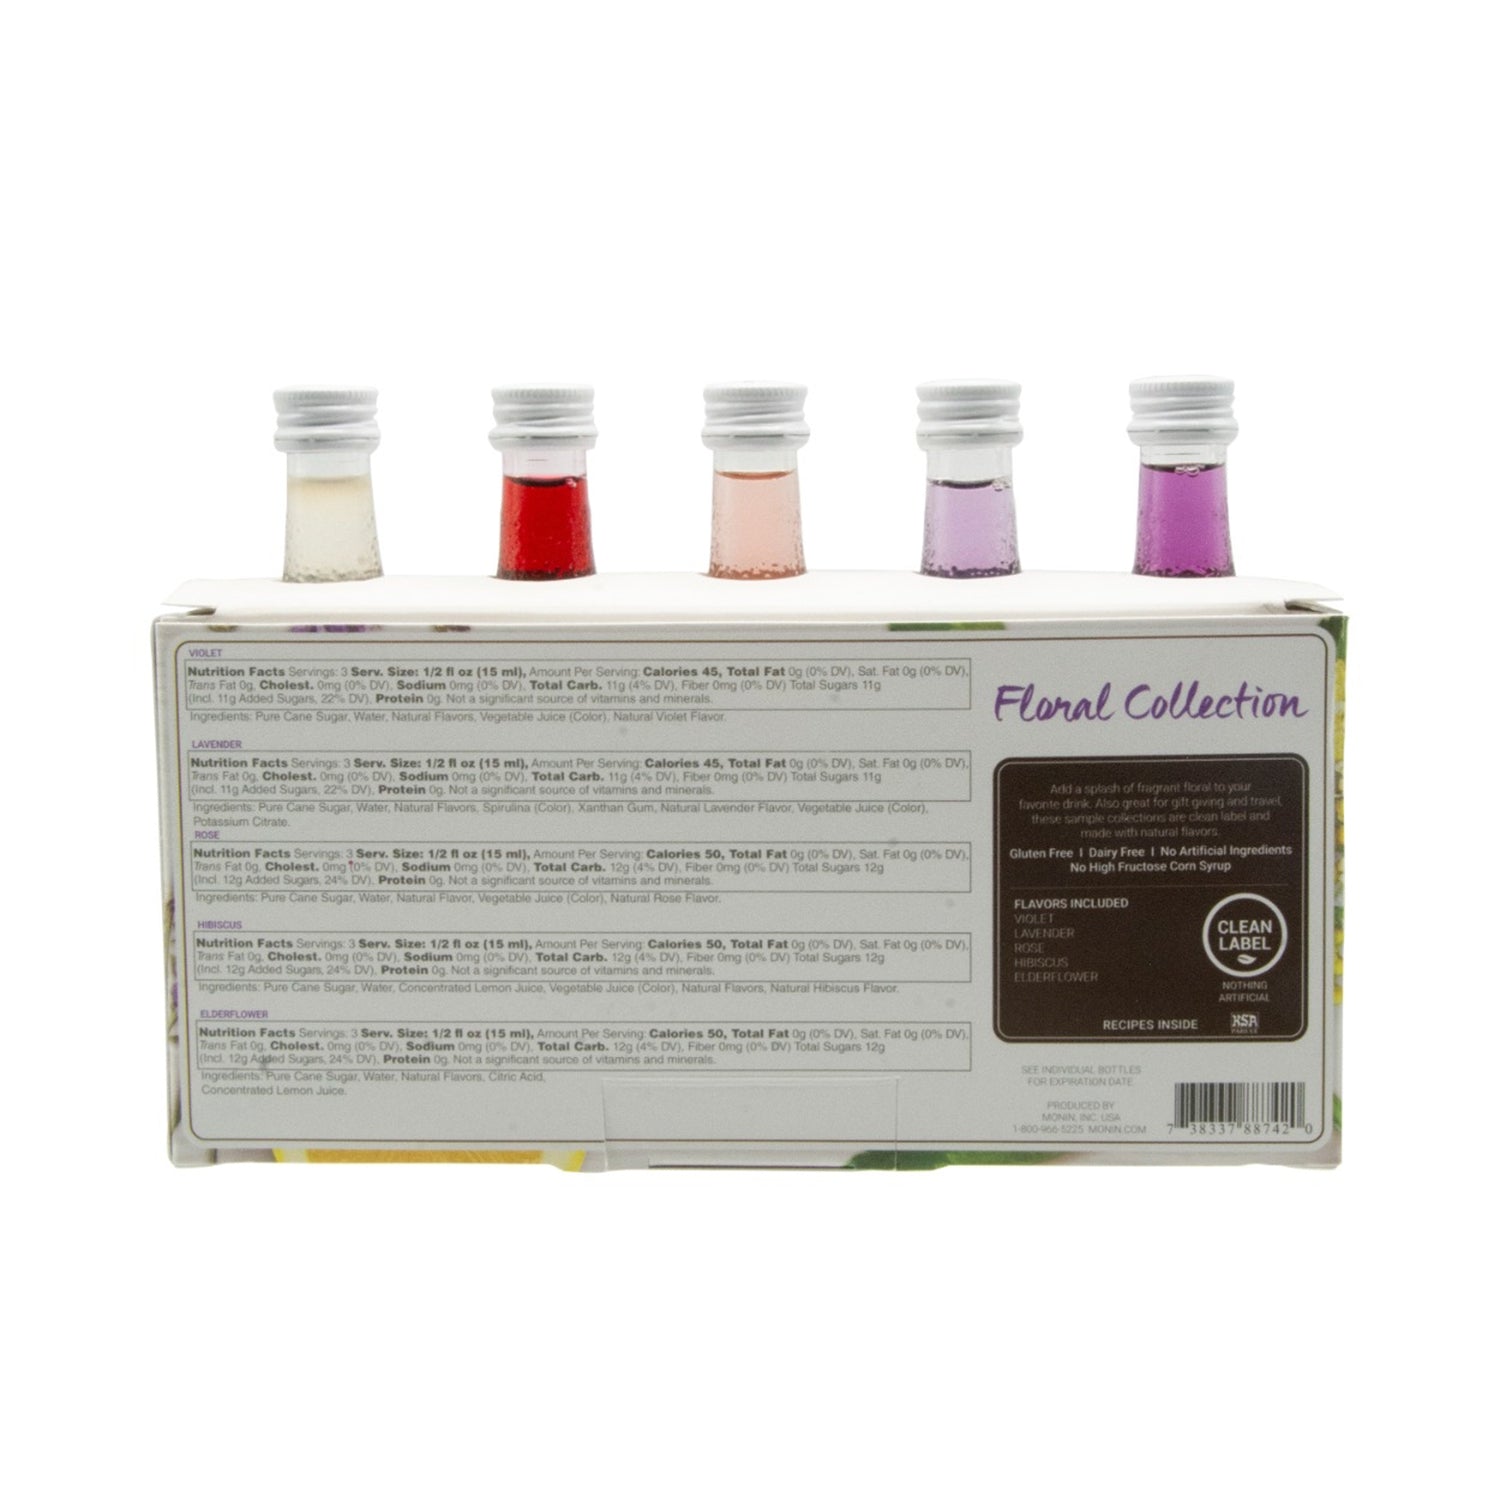 Monin Mini Floral Collection Gourmet Flavorings in packaging with flavor descriptions